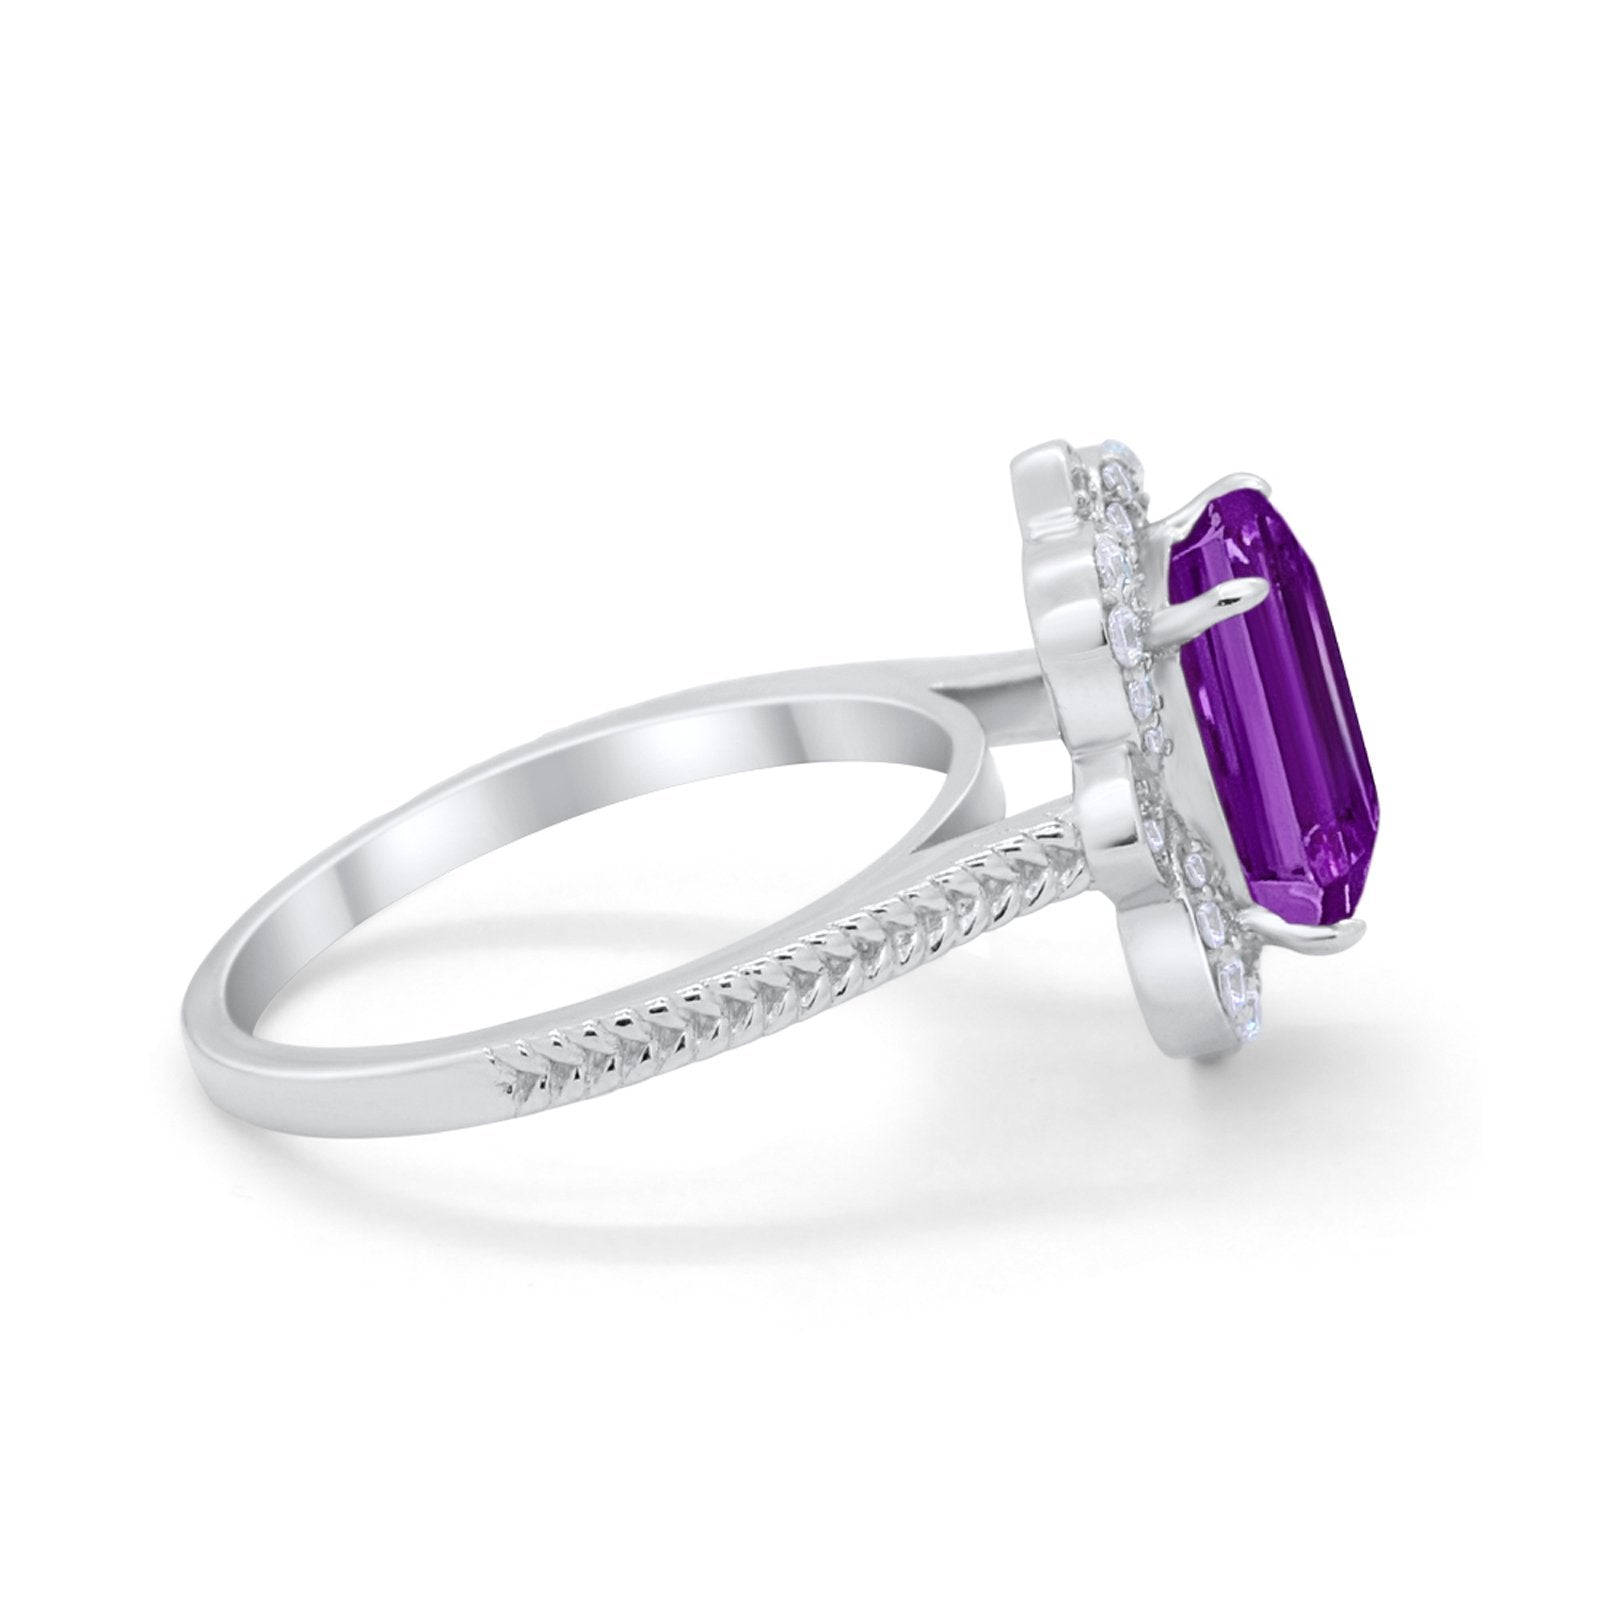 Halo Emerald Cut Engagement Ring Simulated Amethyst  CZ 925 Sterling Silver